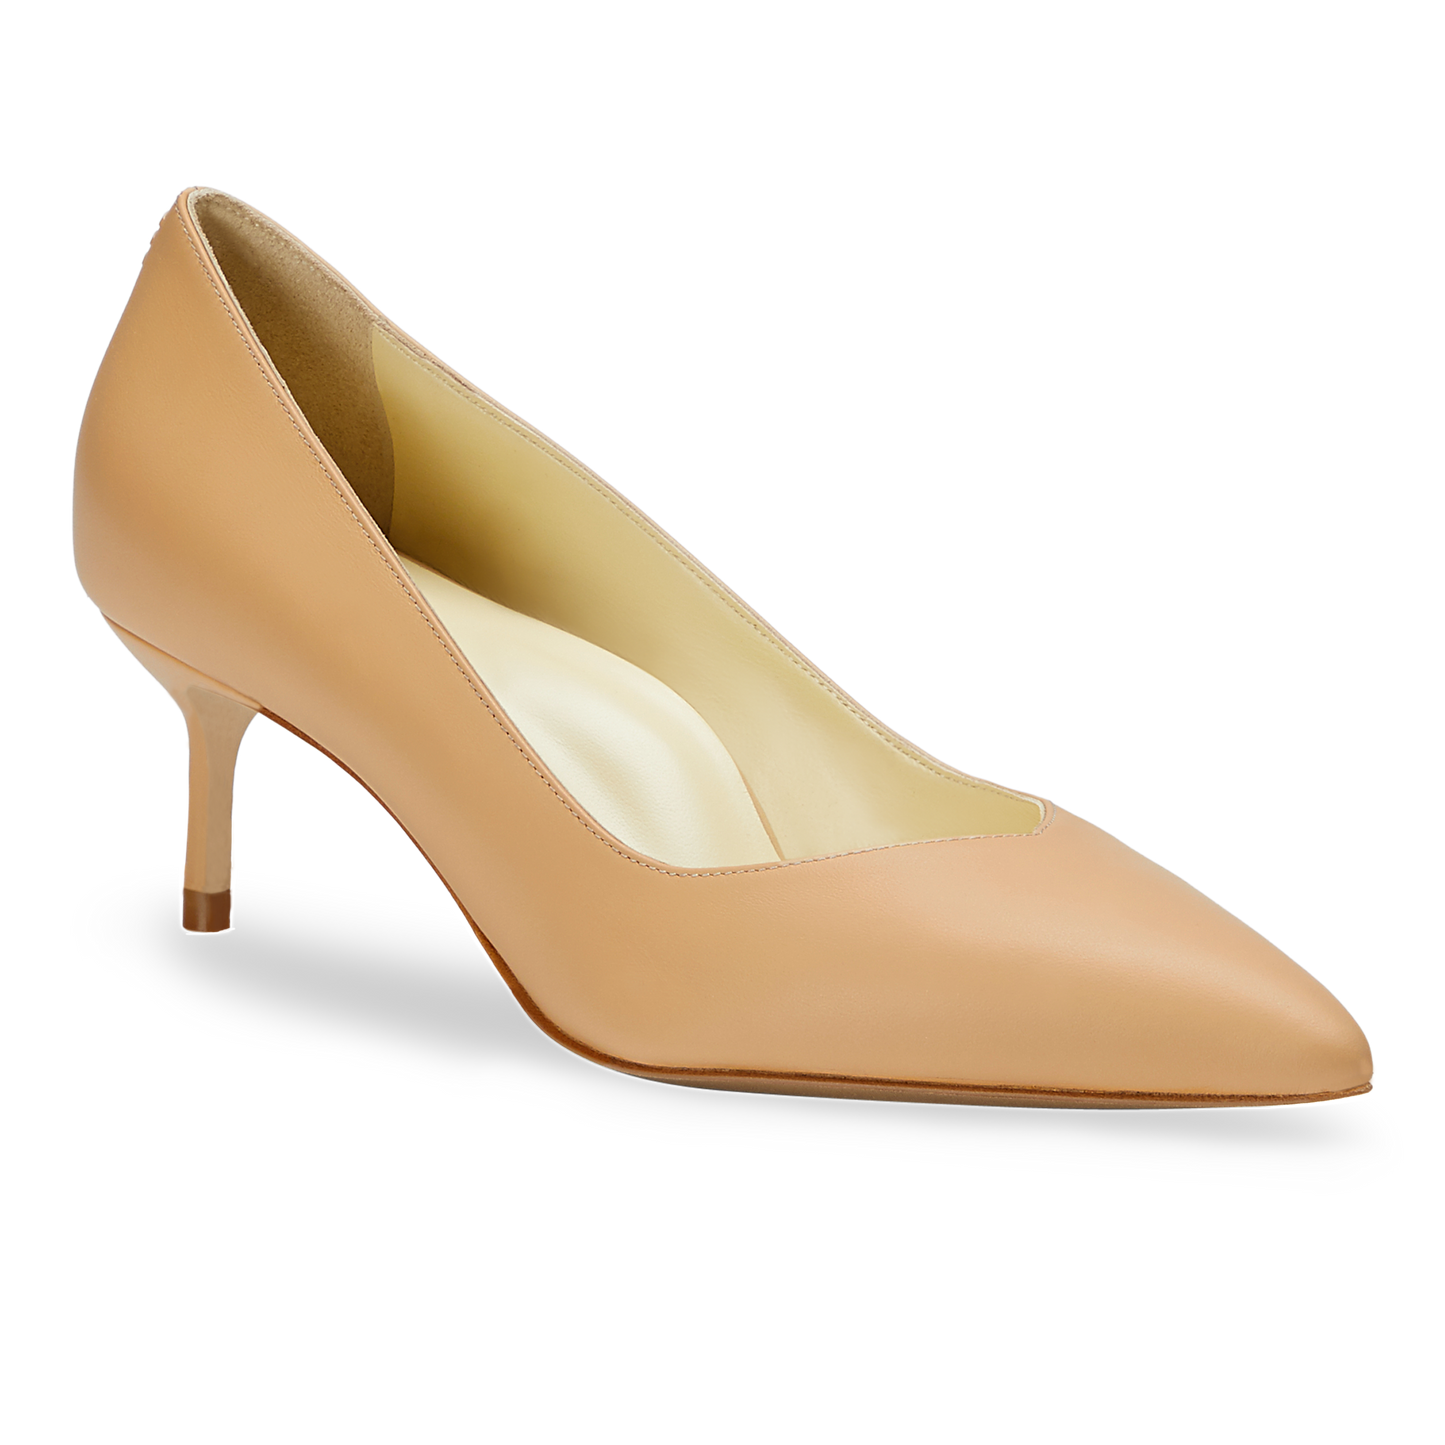 50mm Italian Made Pointed Toe Pump in Sand Calf